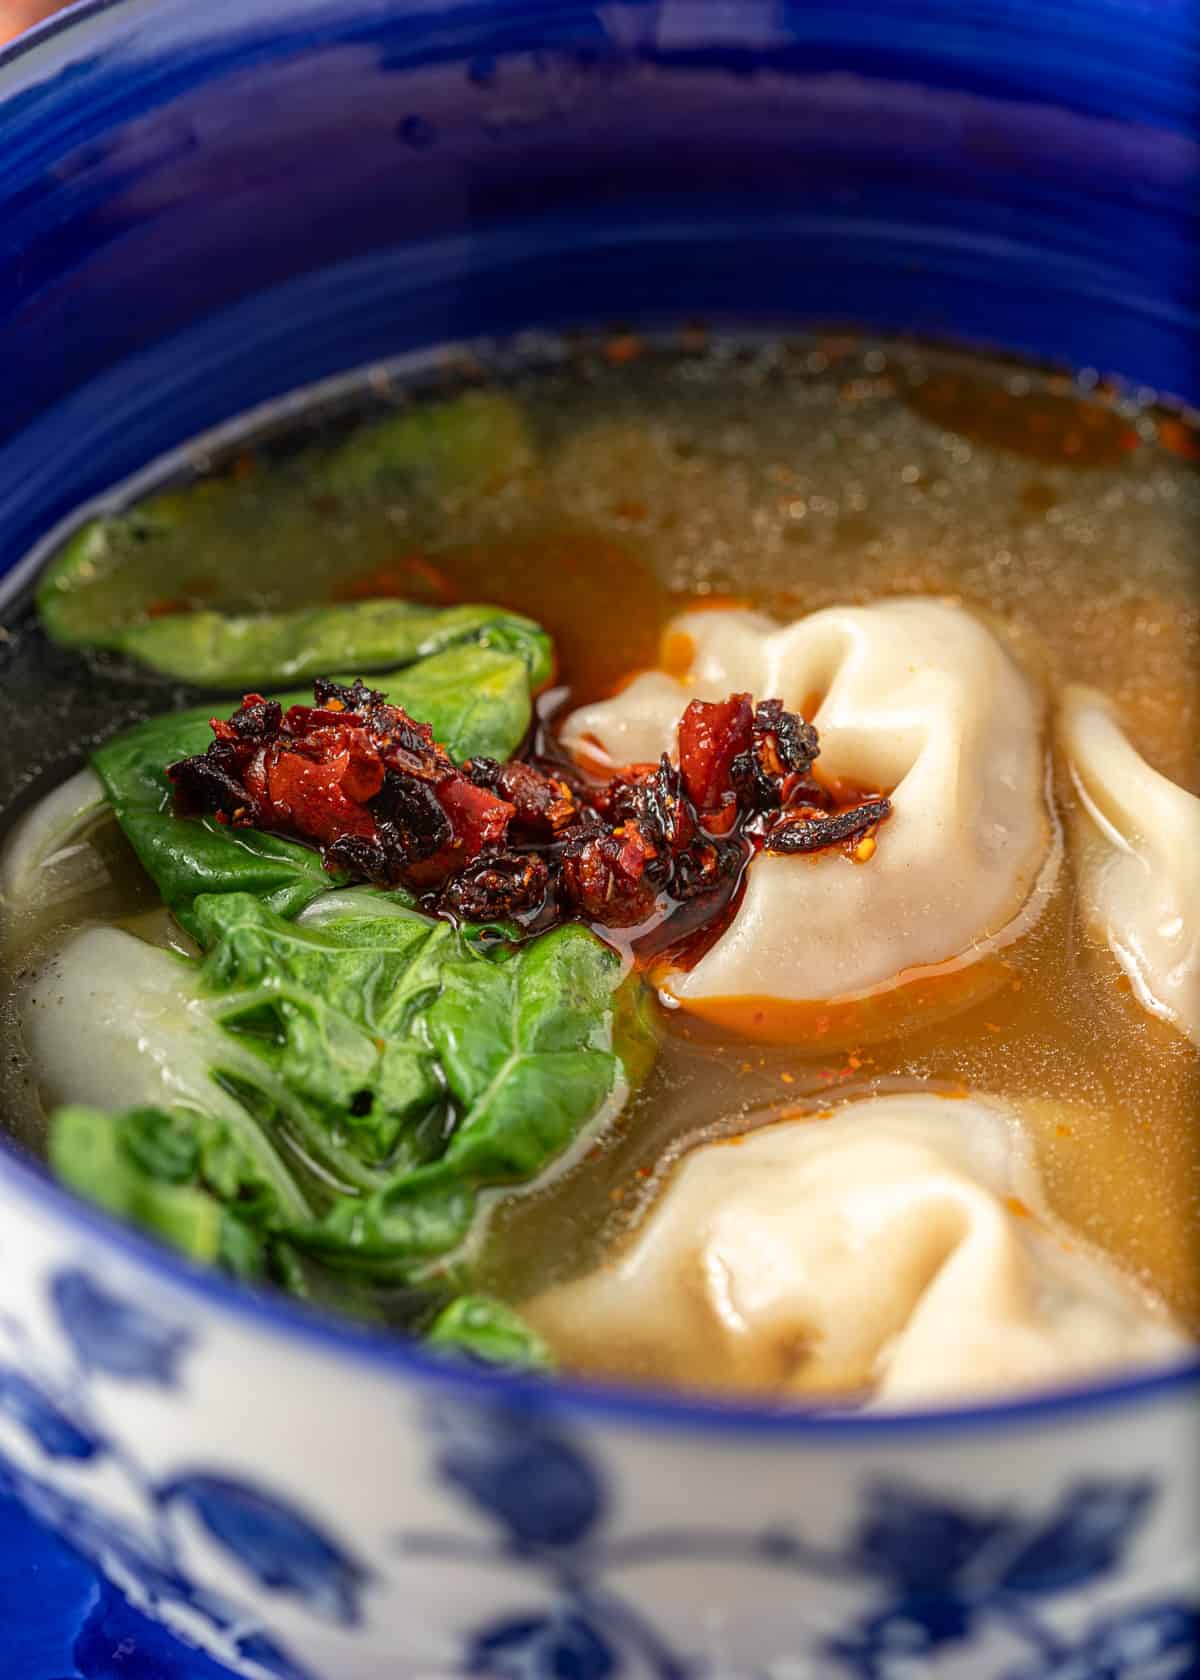 extreme closeup: wonton soup with chili paste and bok choy on top